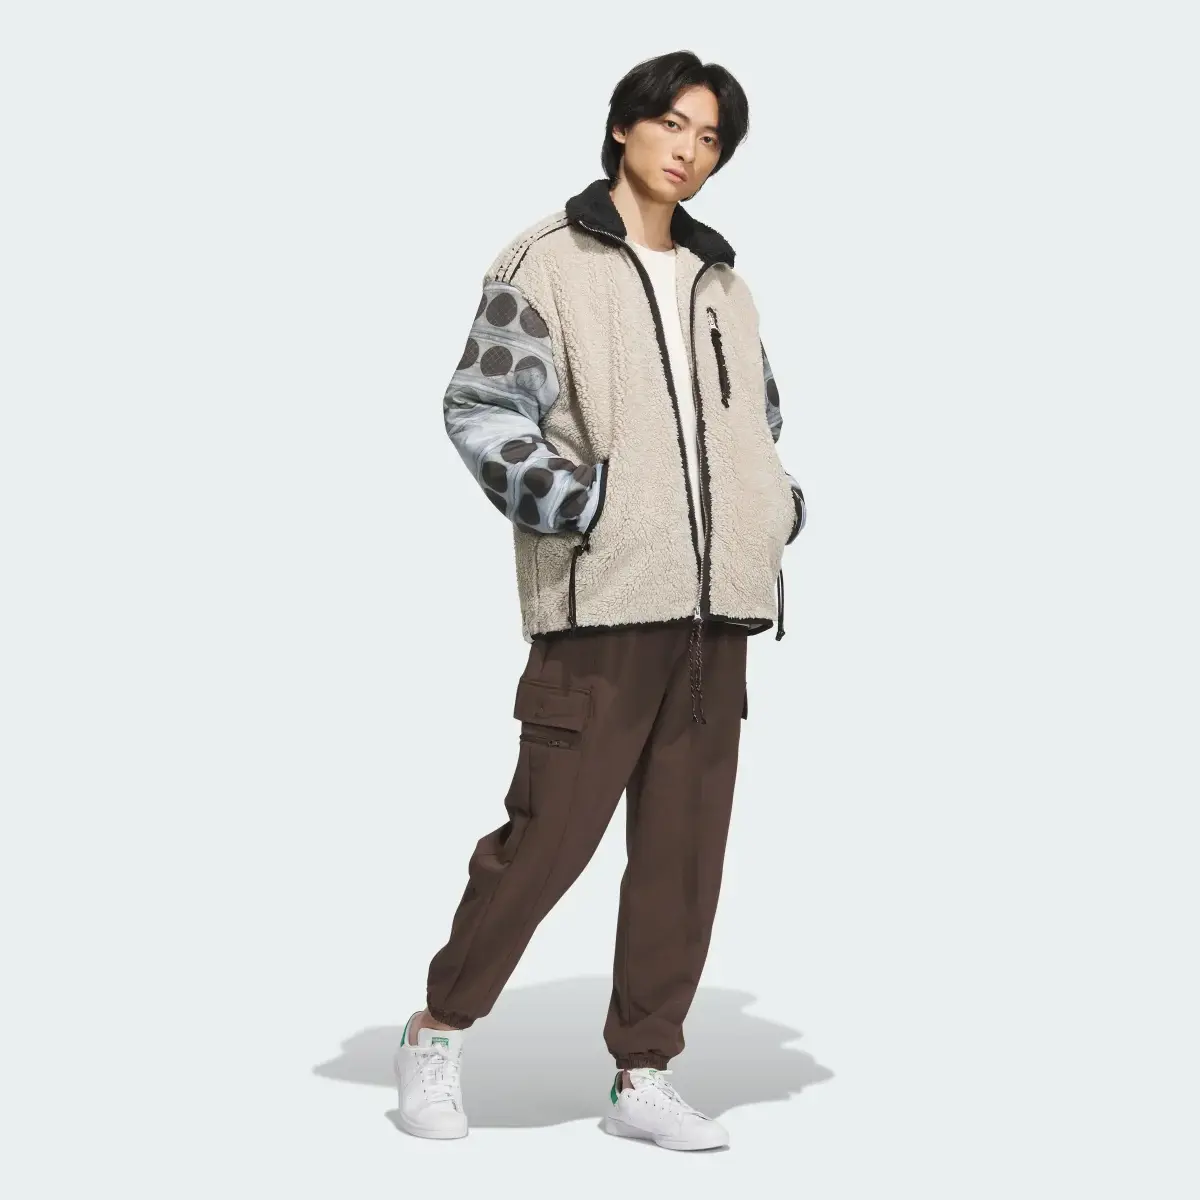 Adidas Song for the Mute Fleece Jacket (Gender Neutral). 3